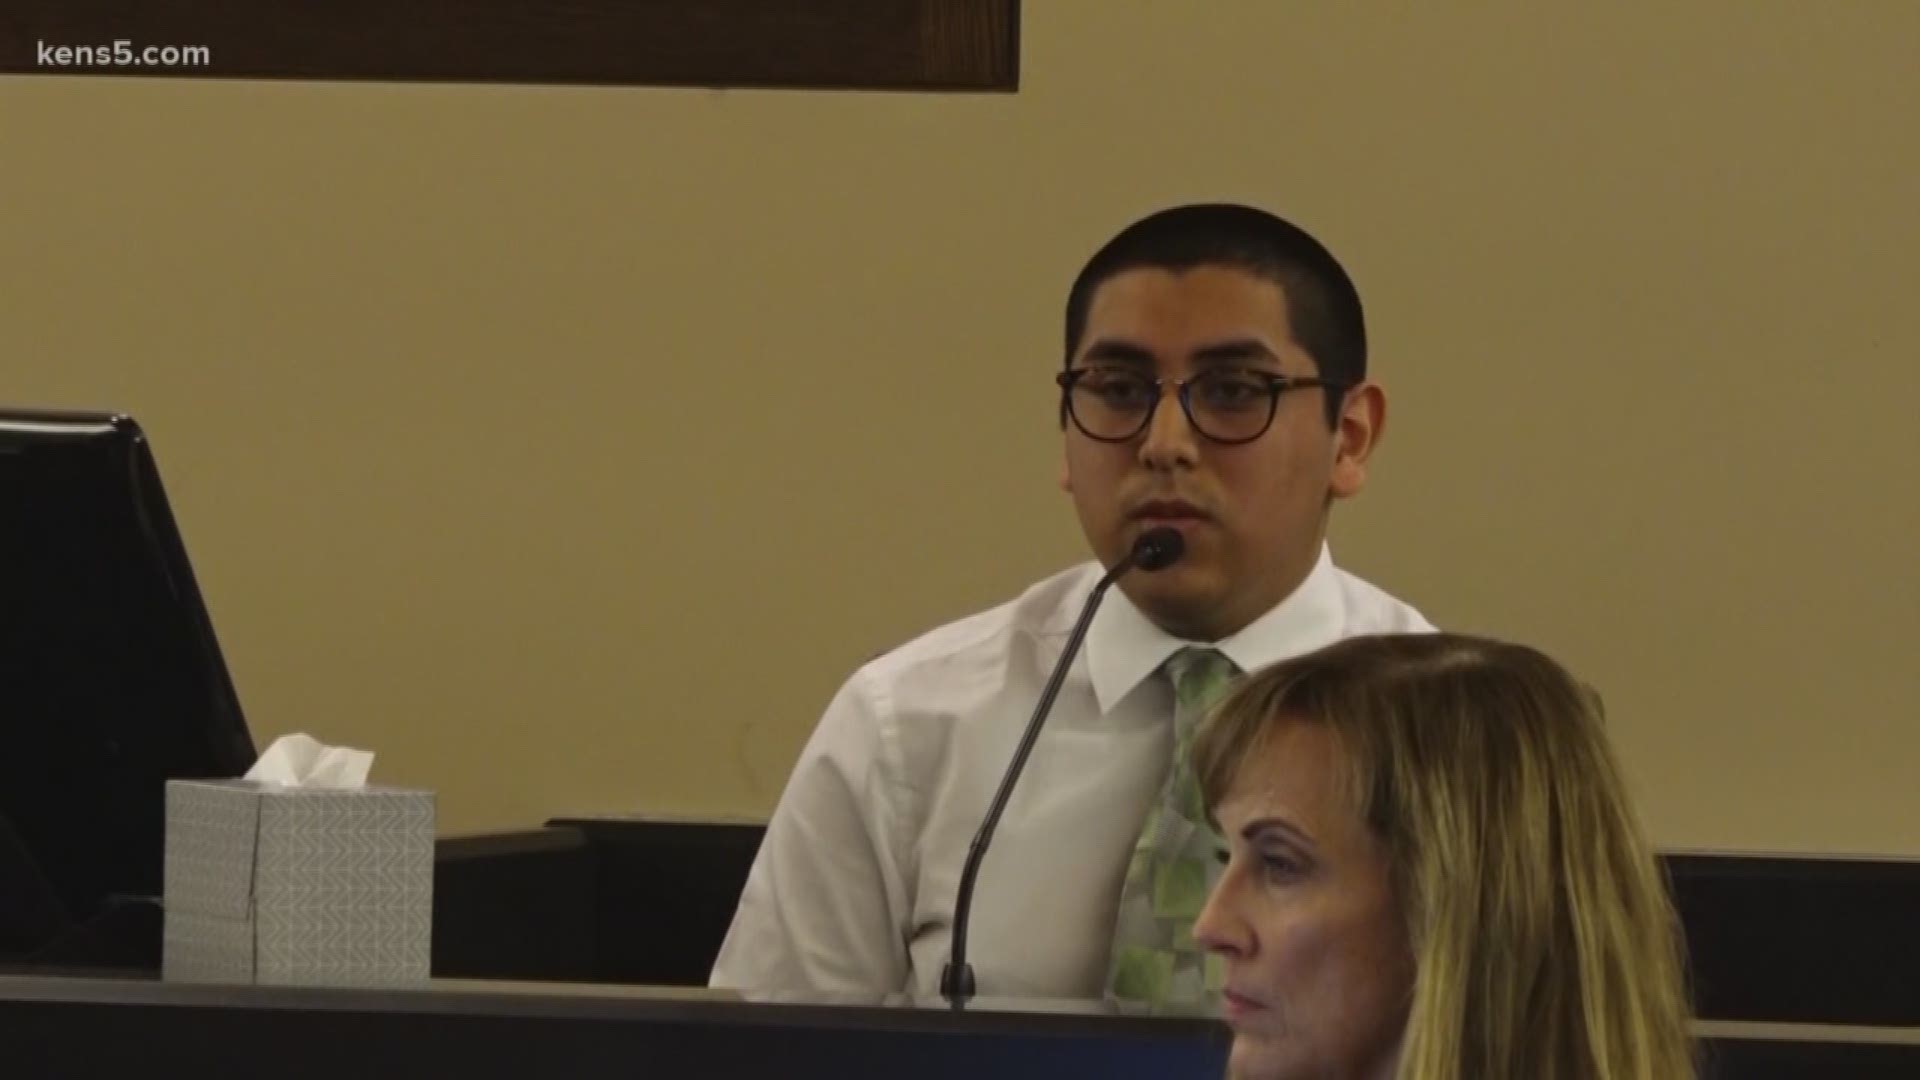 In the murder trial of Jonathan Perales, the defendant took the stand and said that the victim that died, Michael Robinson, fired first. But an expert witness says that Perales fired first.